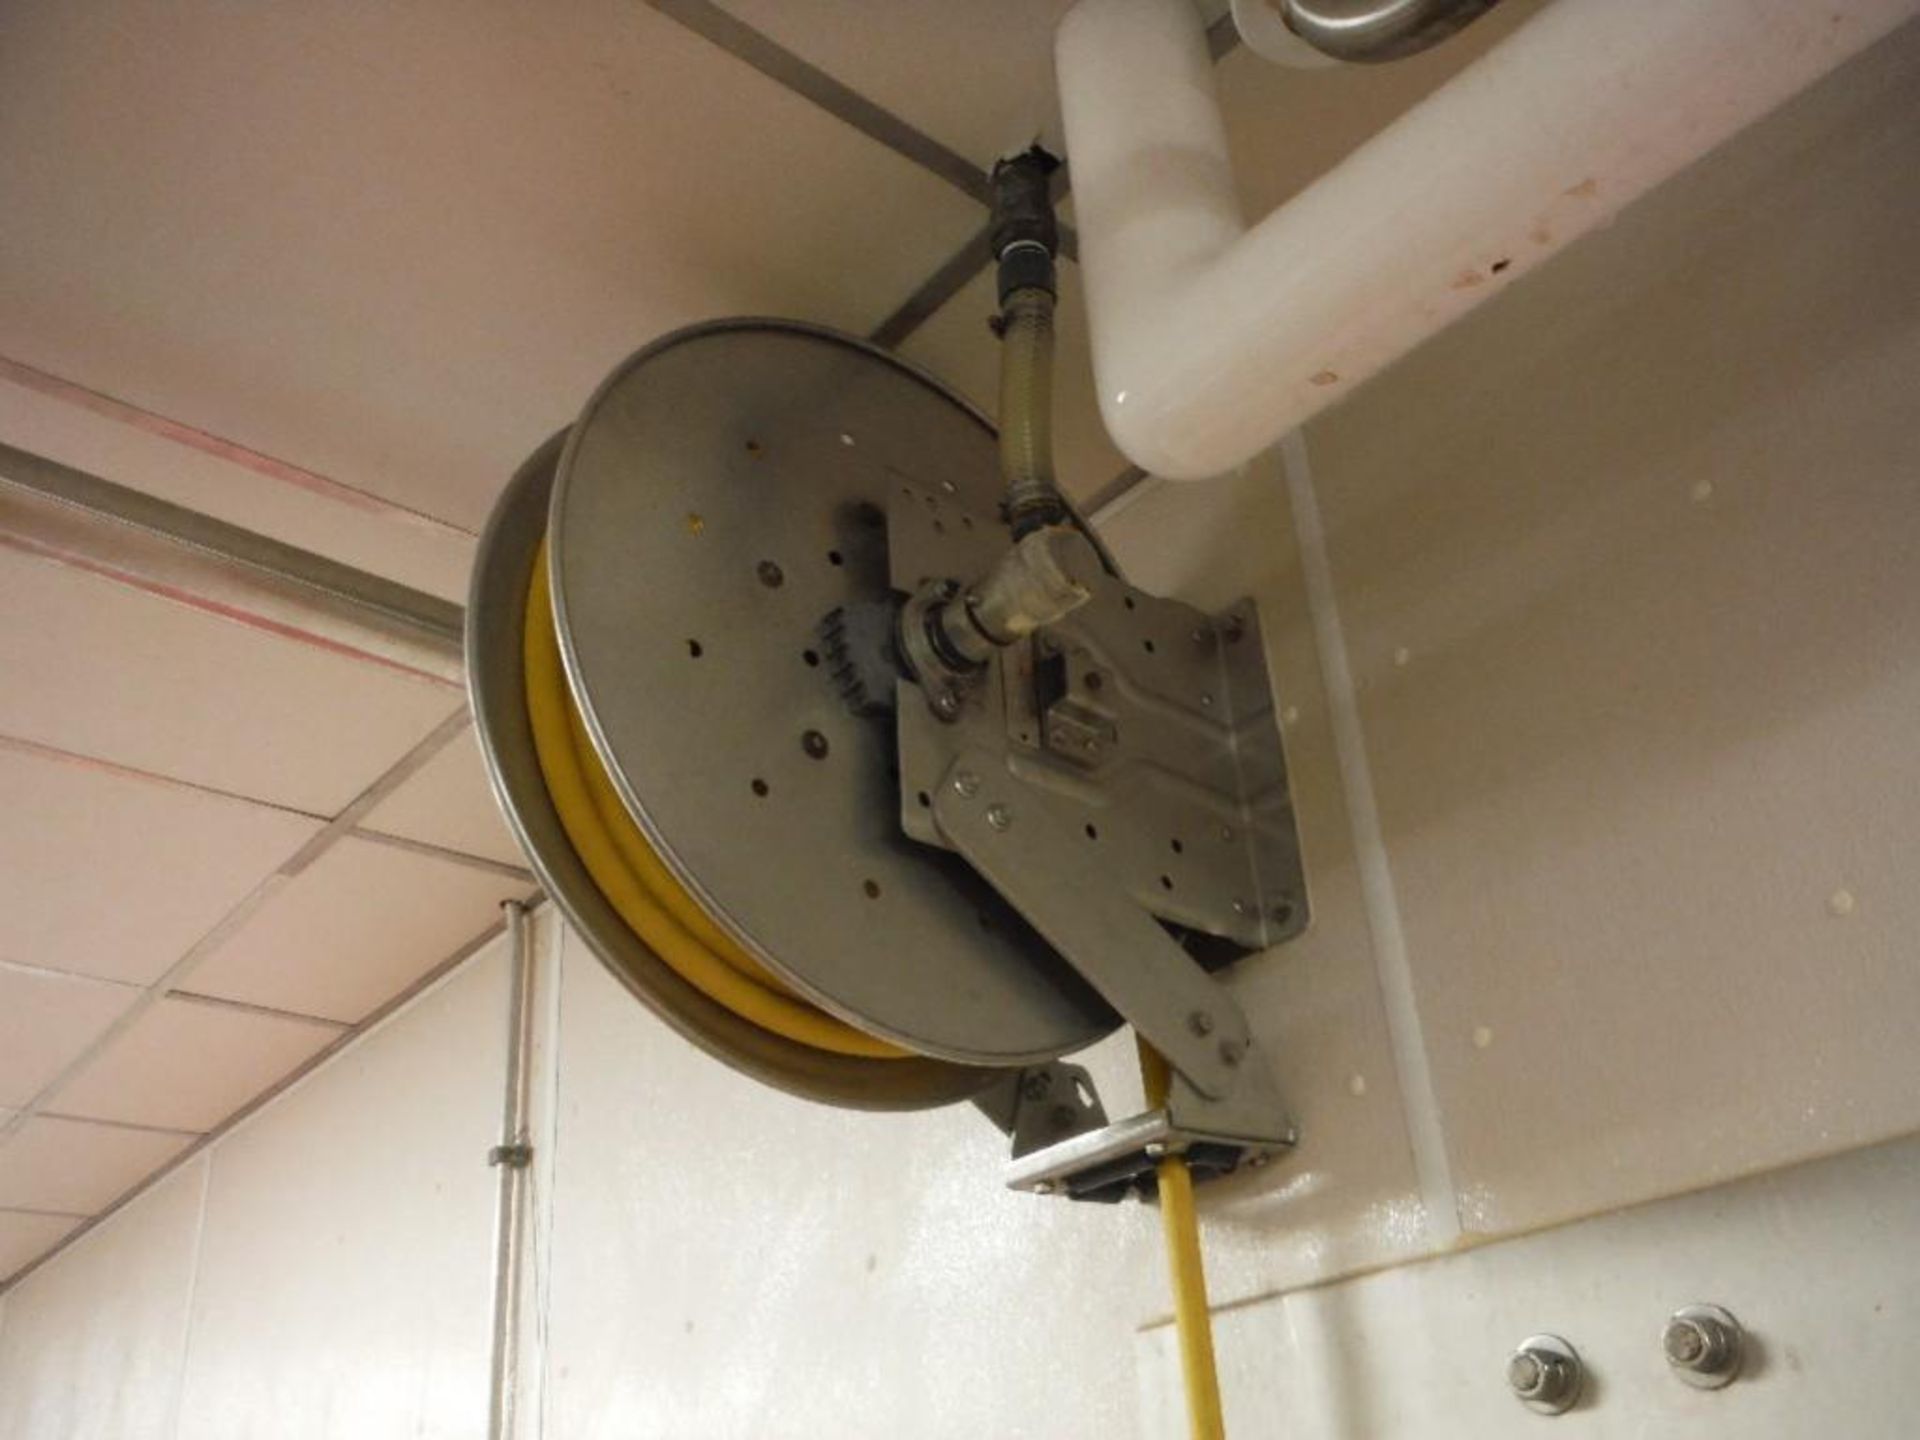 SS retractable hose reel and hose, with hose. - RIGGING FEE FOR DOMESTIC TRANSPORT $75 - Image 3 of 5